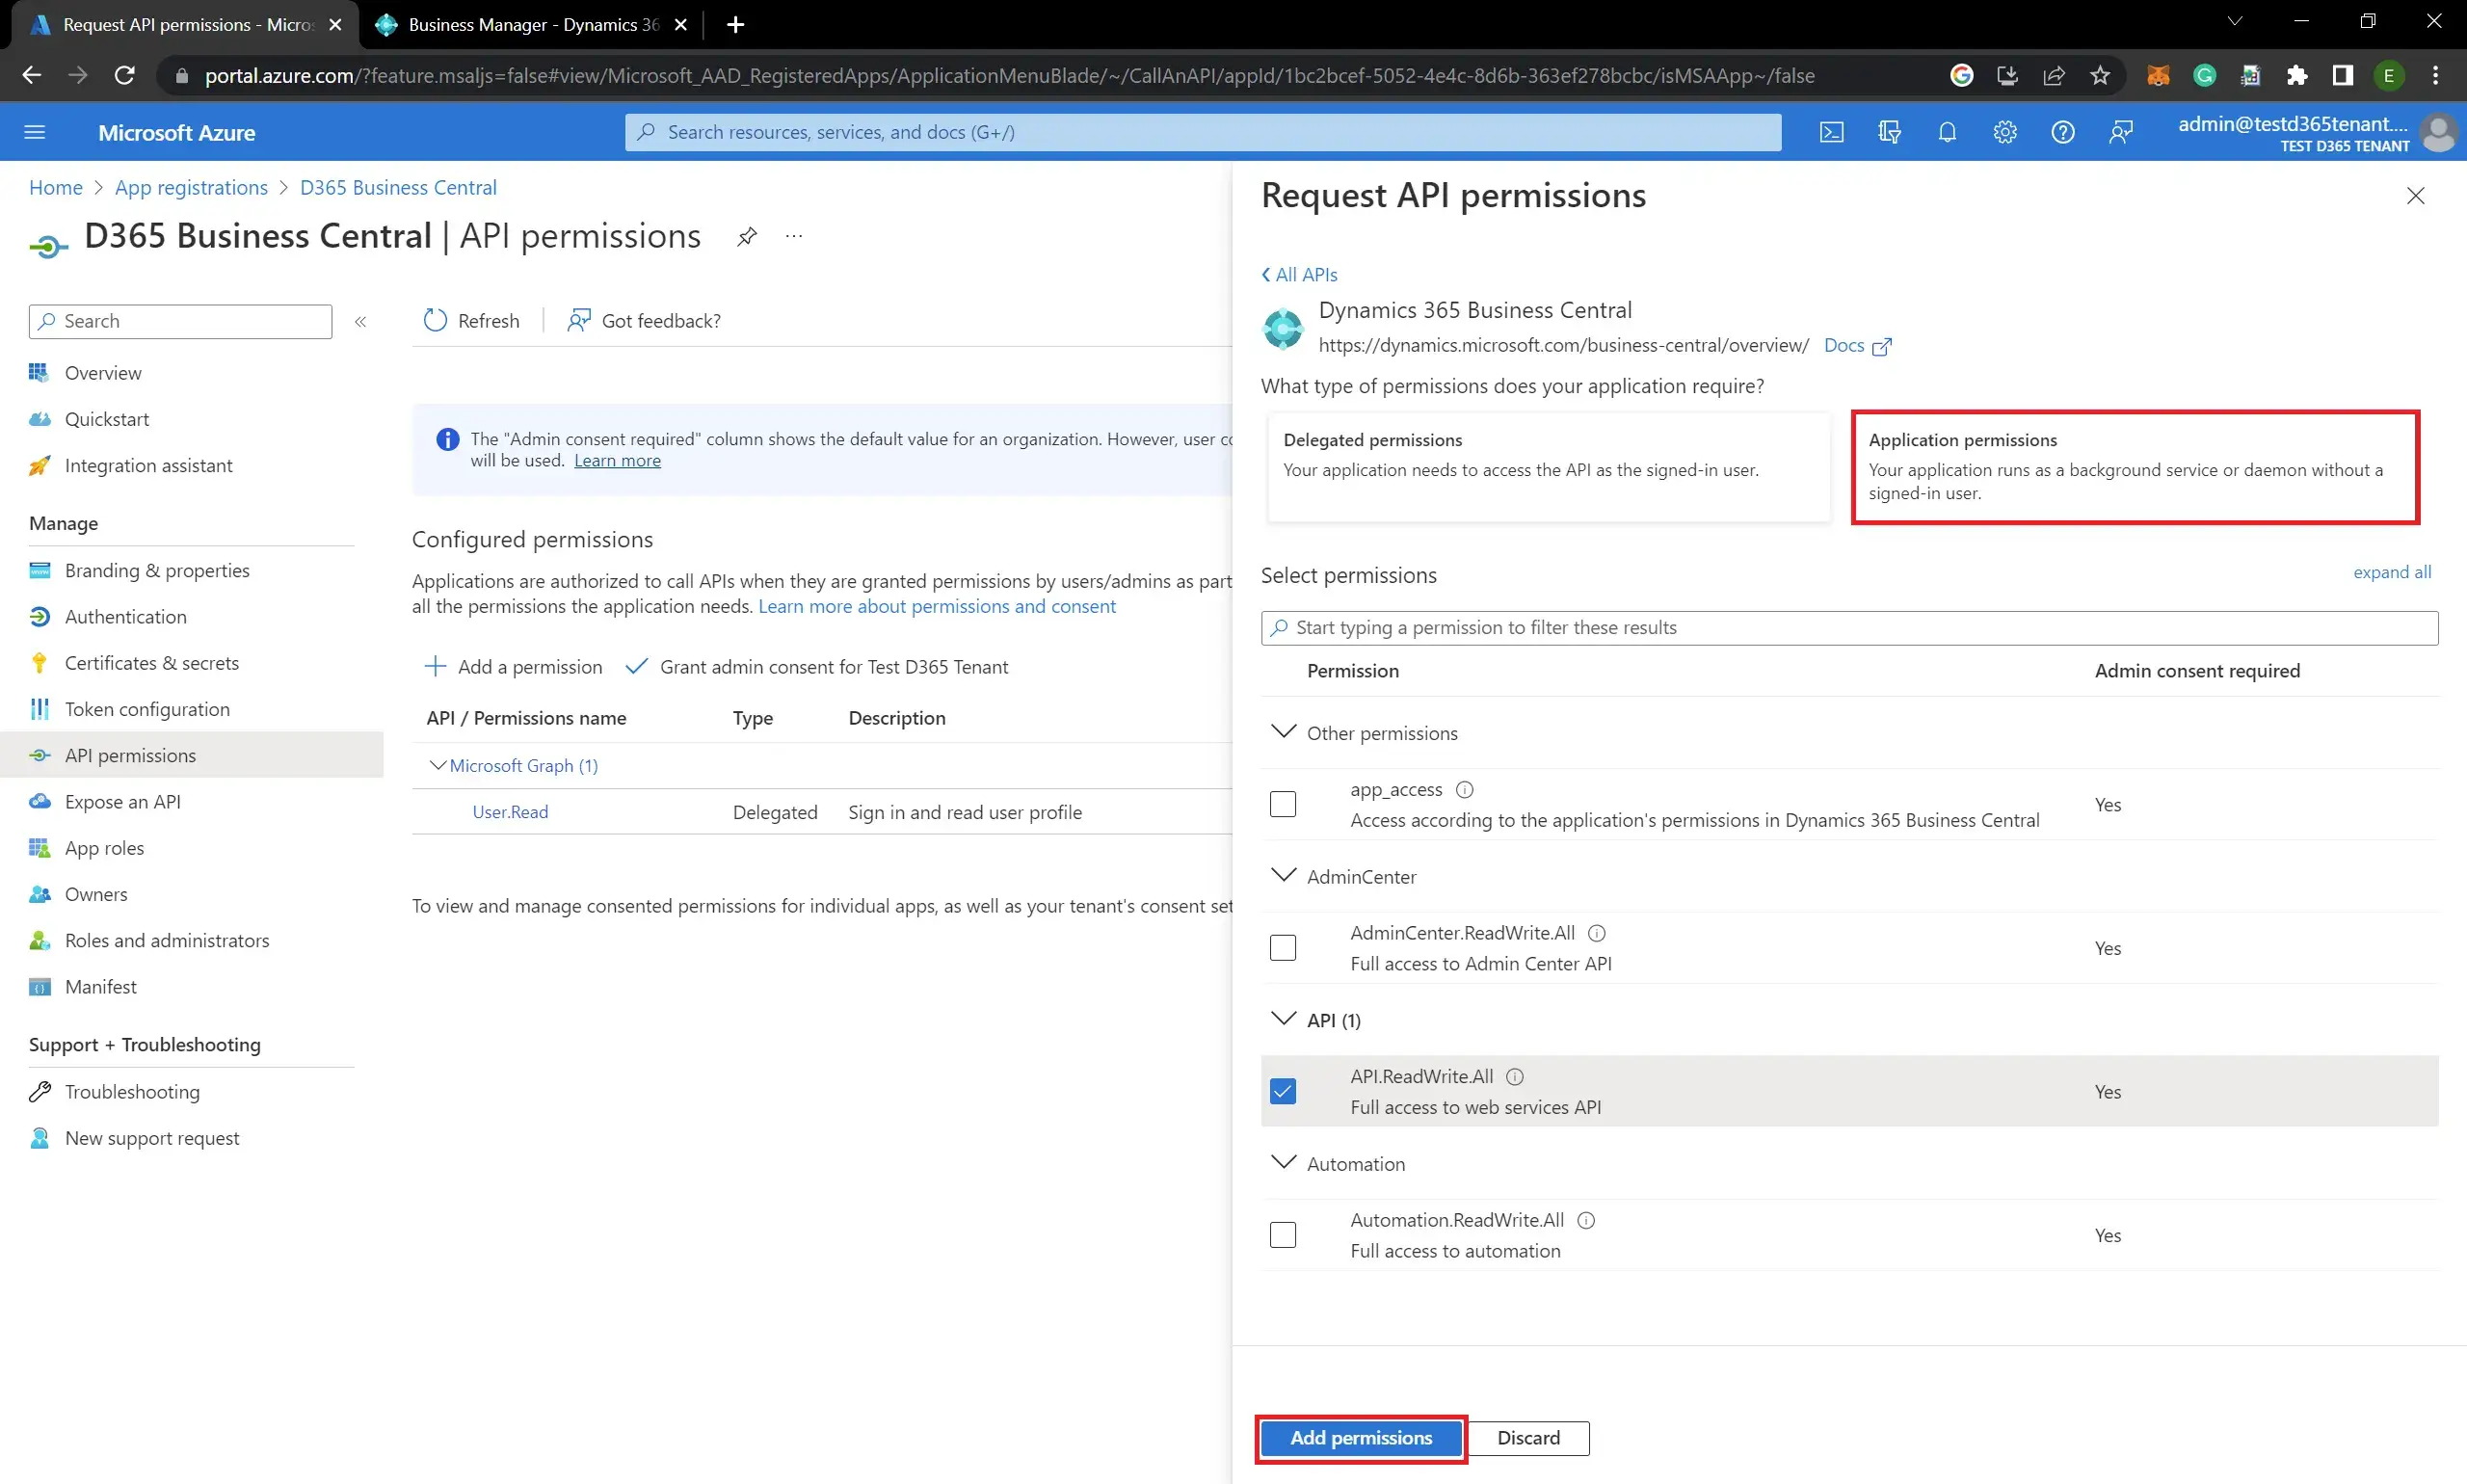 How to give Request API permissions of Business Central App Registration Azure